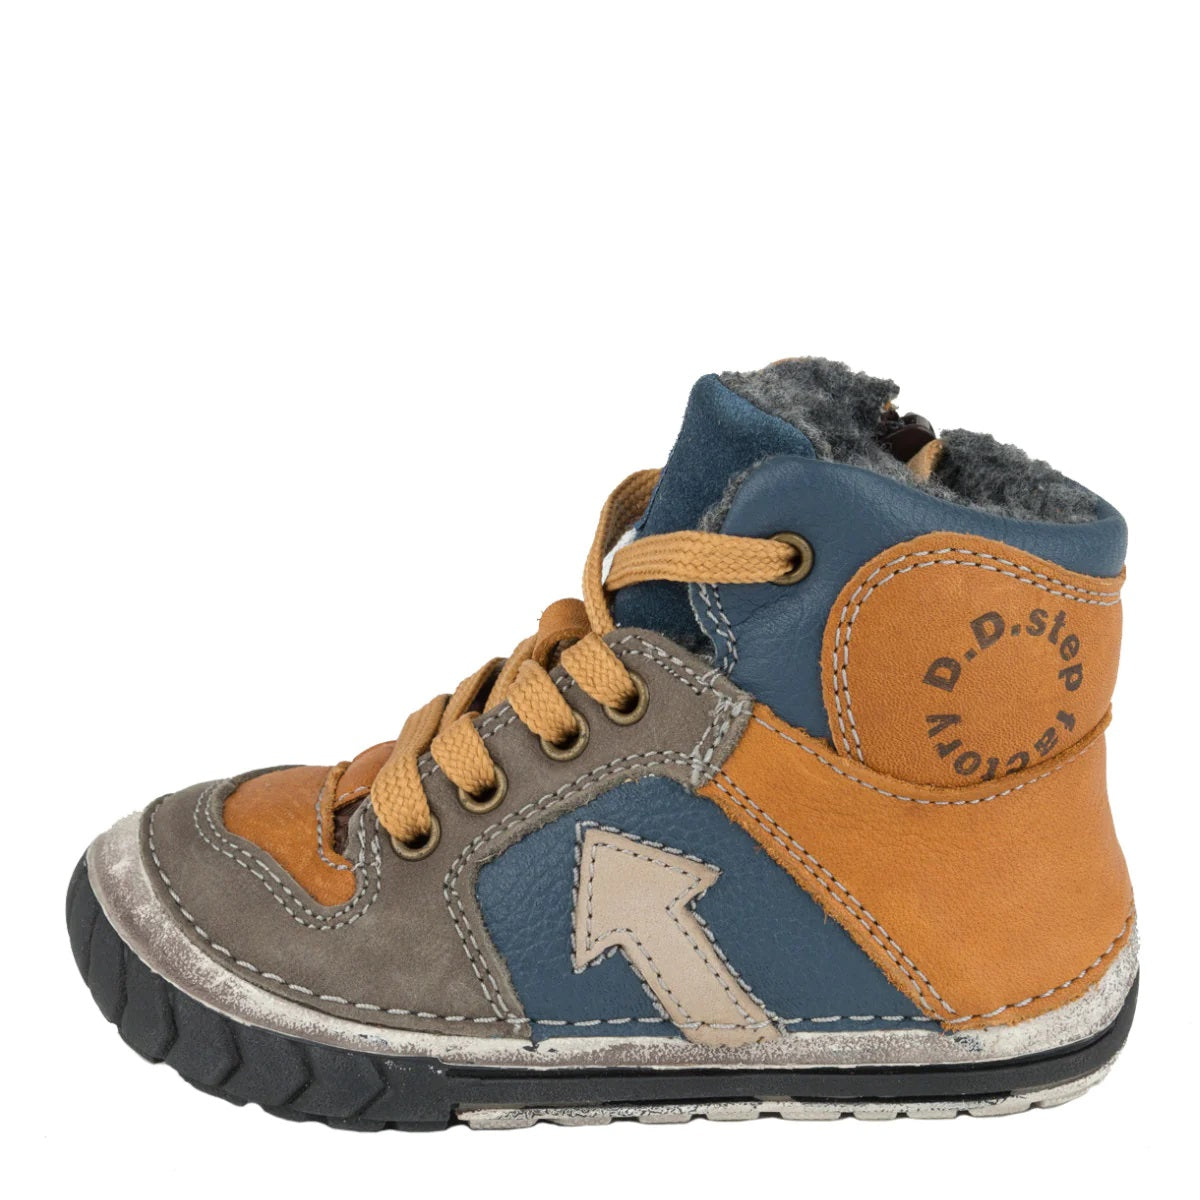 D.D. Step Toddler Boy Shoes/Winter Boots With Faux Fur Insulation Blue And Bronze Arrow - Supportive Leather Shoes From Europe Kids Orthopedic - shoekid.ca